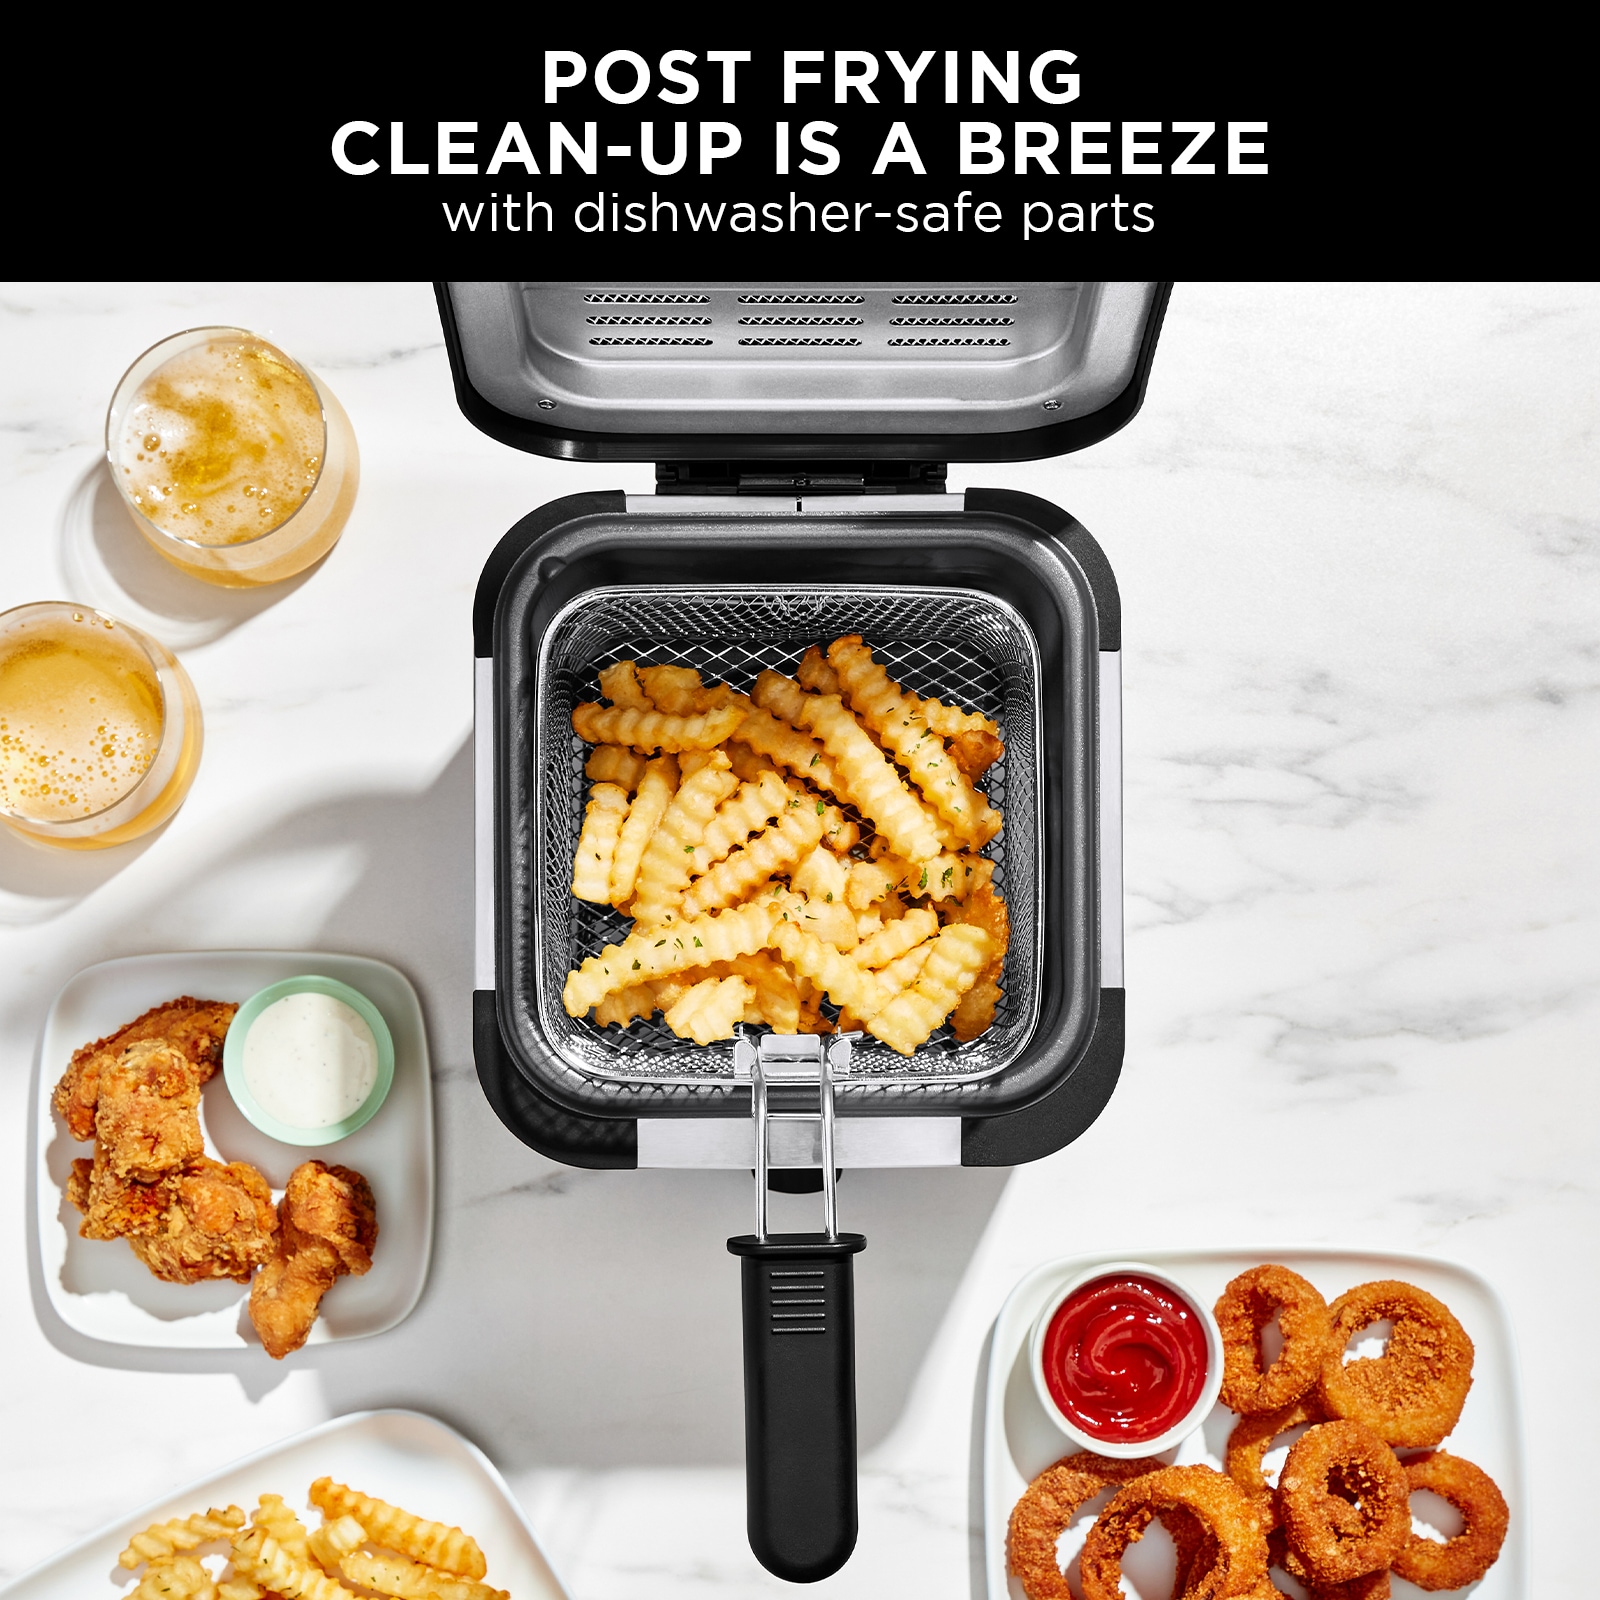  Chefman Fry Guy Deep Fryer with Removable Basket, Easy-to-Clean  Non-Stick Coating and Cool-to-Touch Exterior, Adjustable Temperature  Control, 4.2 Cup/ 1 Liter Capacity, Stainless Steel: Home & Kitchen